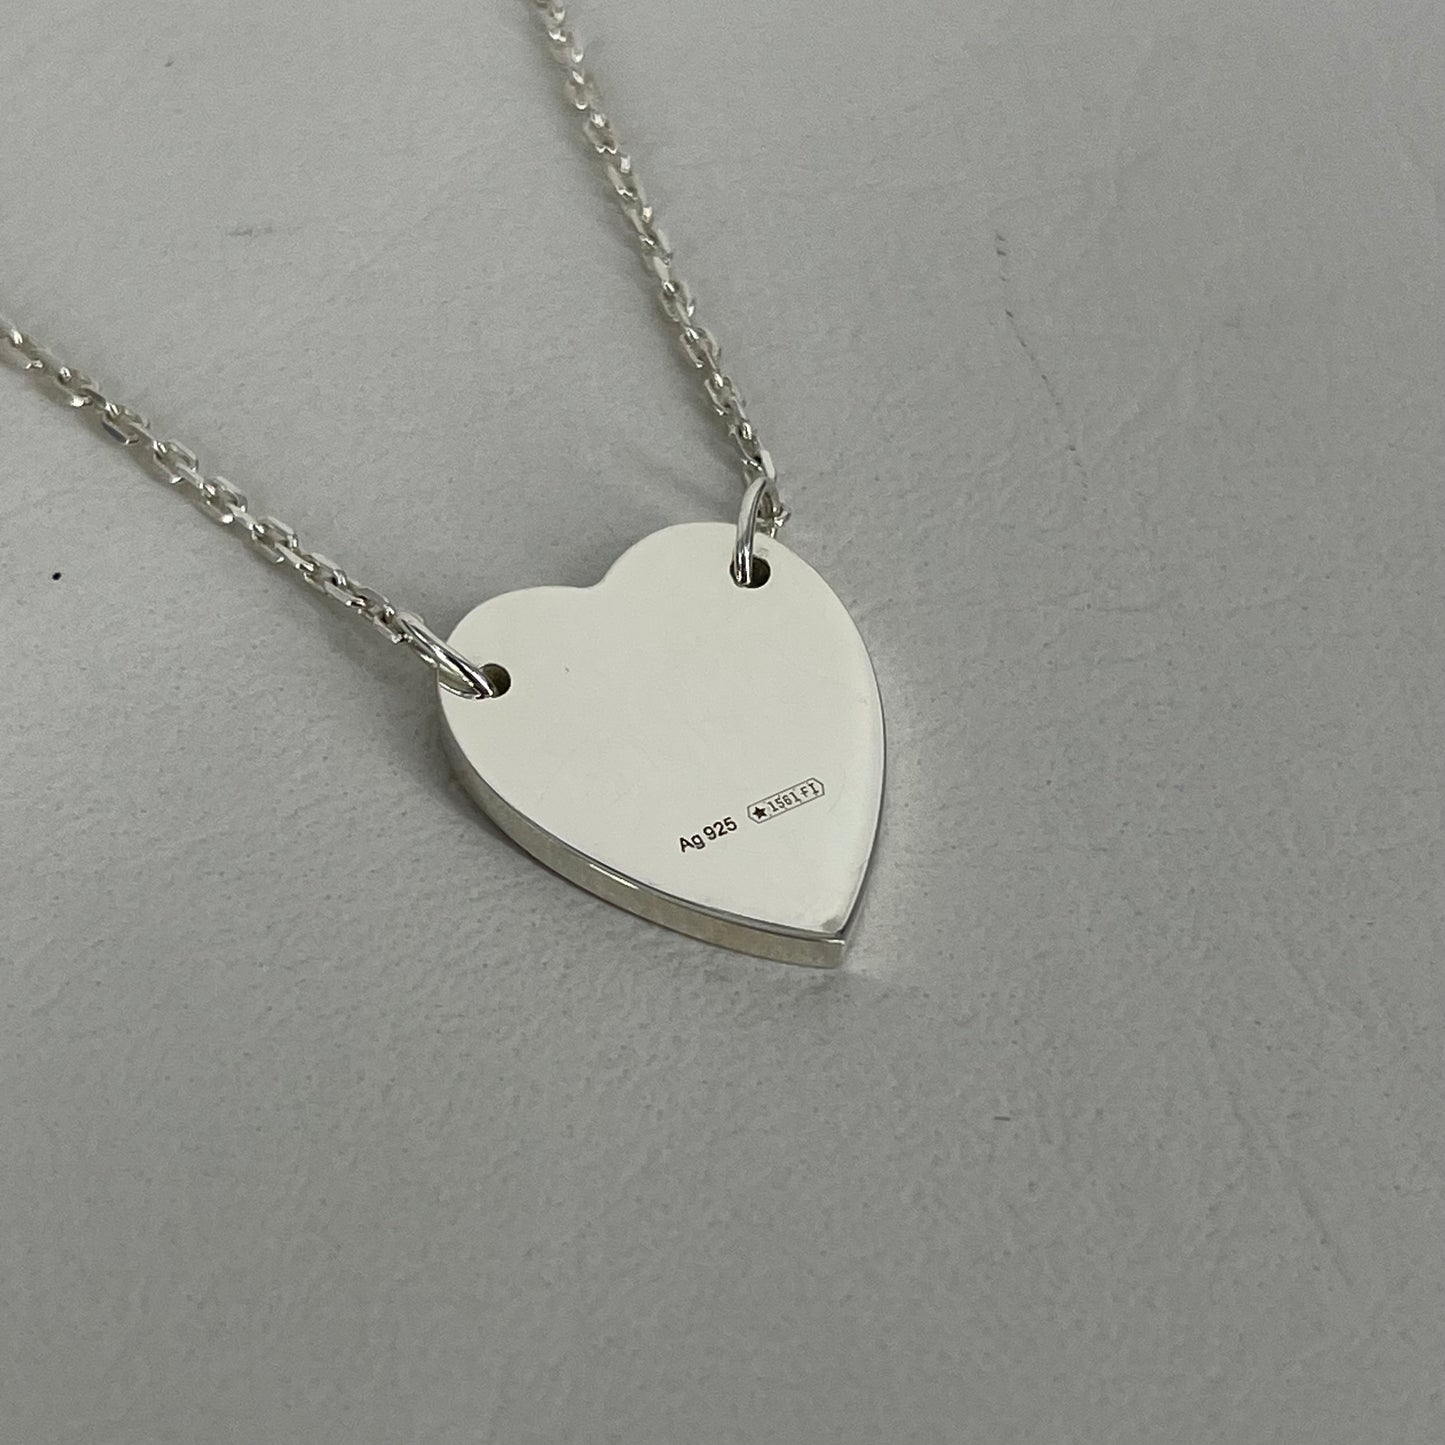 Authentic Gucci Silver Heart Necklace